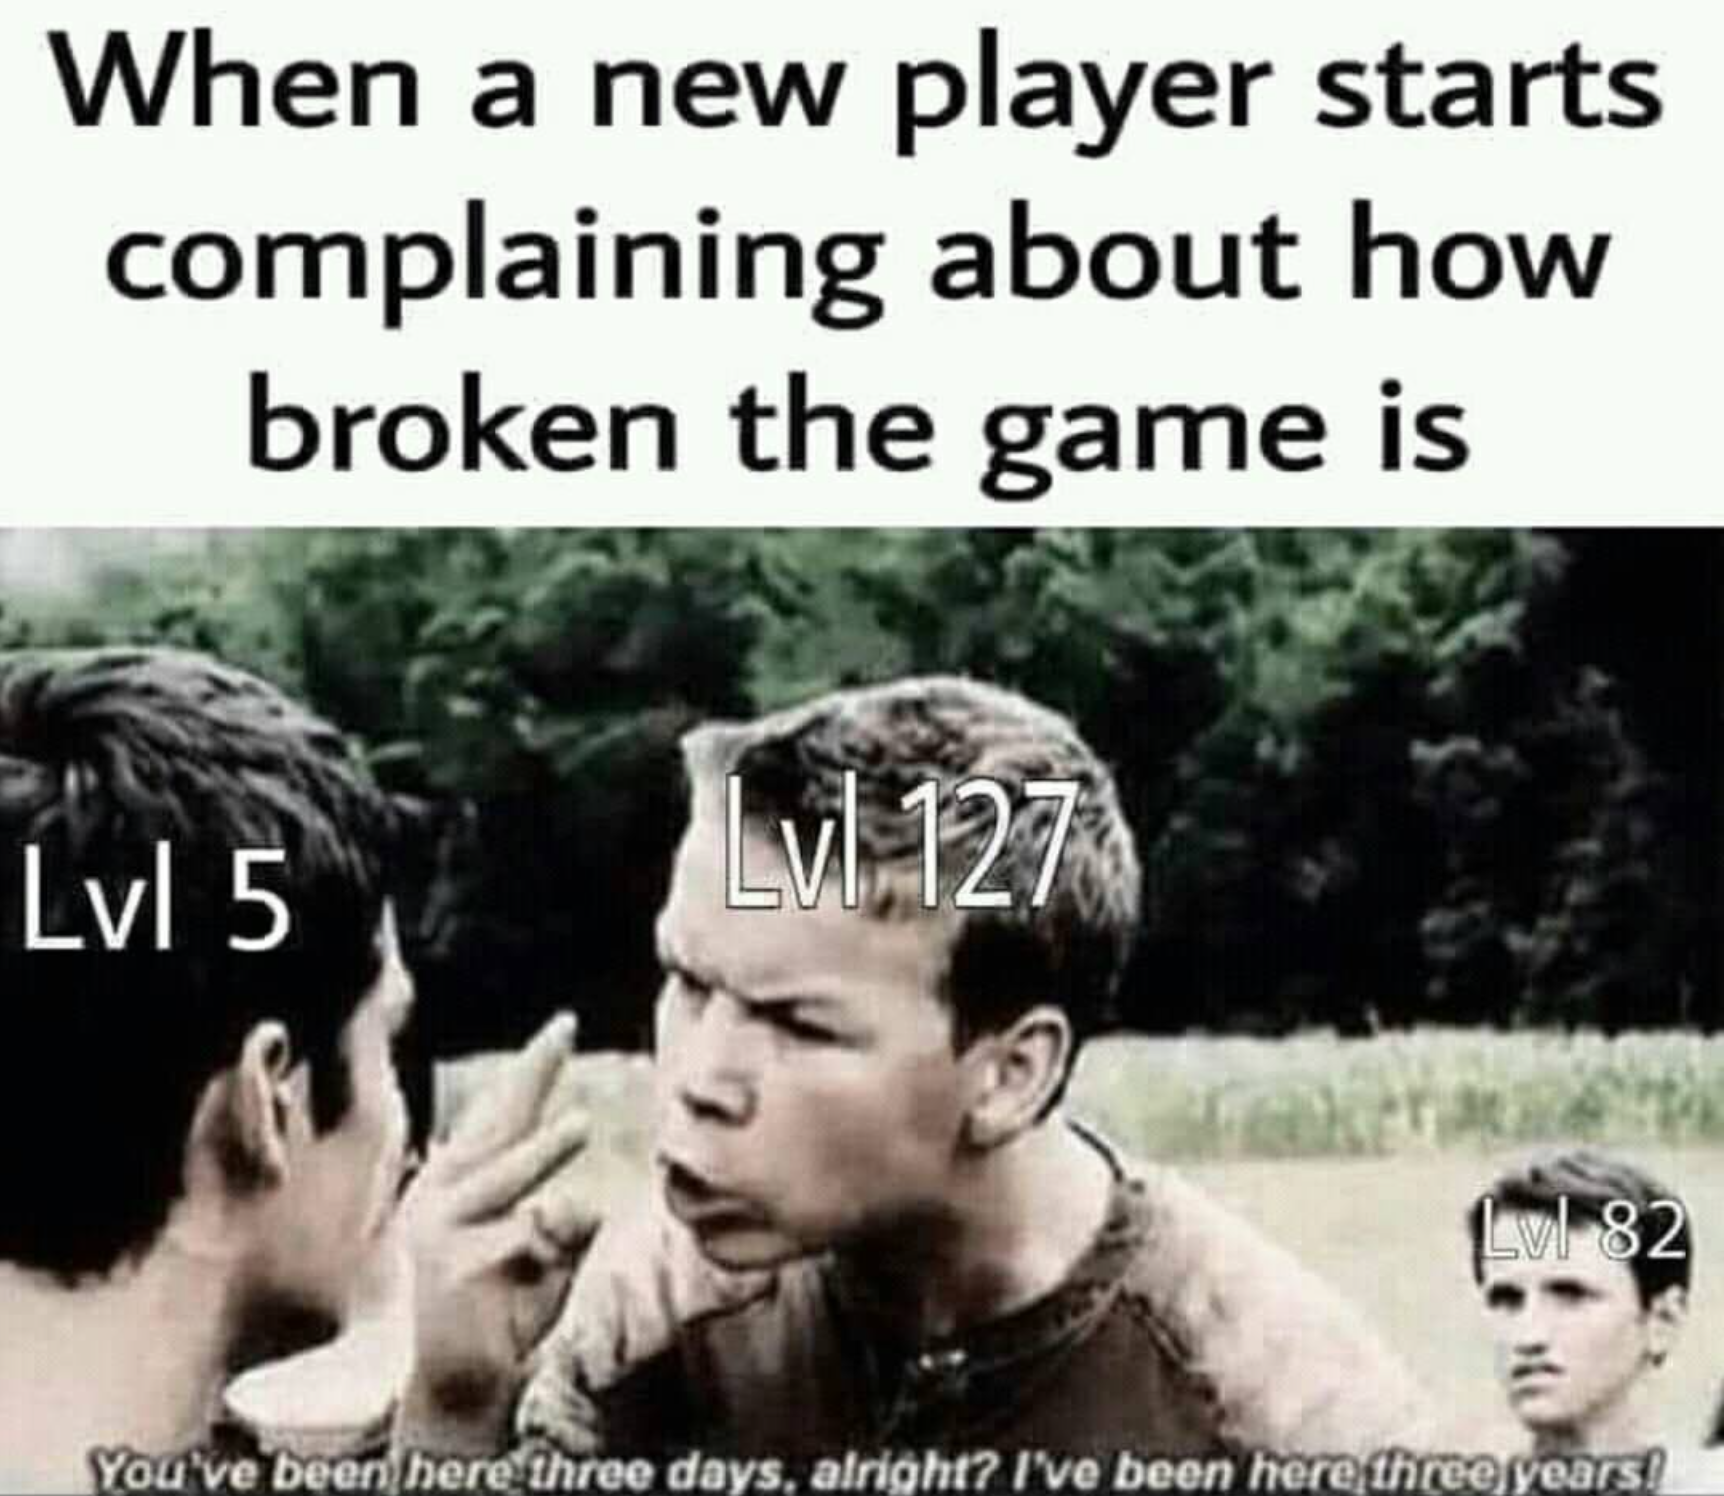 funny gaming memes  - 3 tom holland meme - When a new player starts complaining about how broken the game is Lvl 5 Lvl 127 Lvl 82 You've been here three days, alright? I've been here three years!